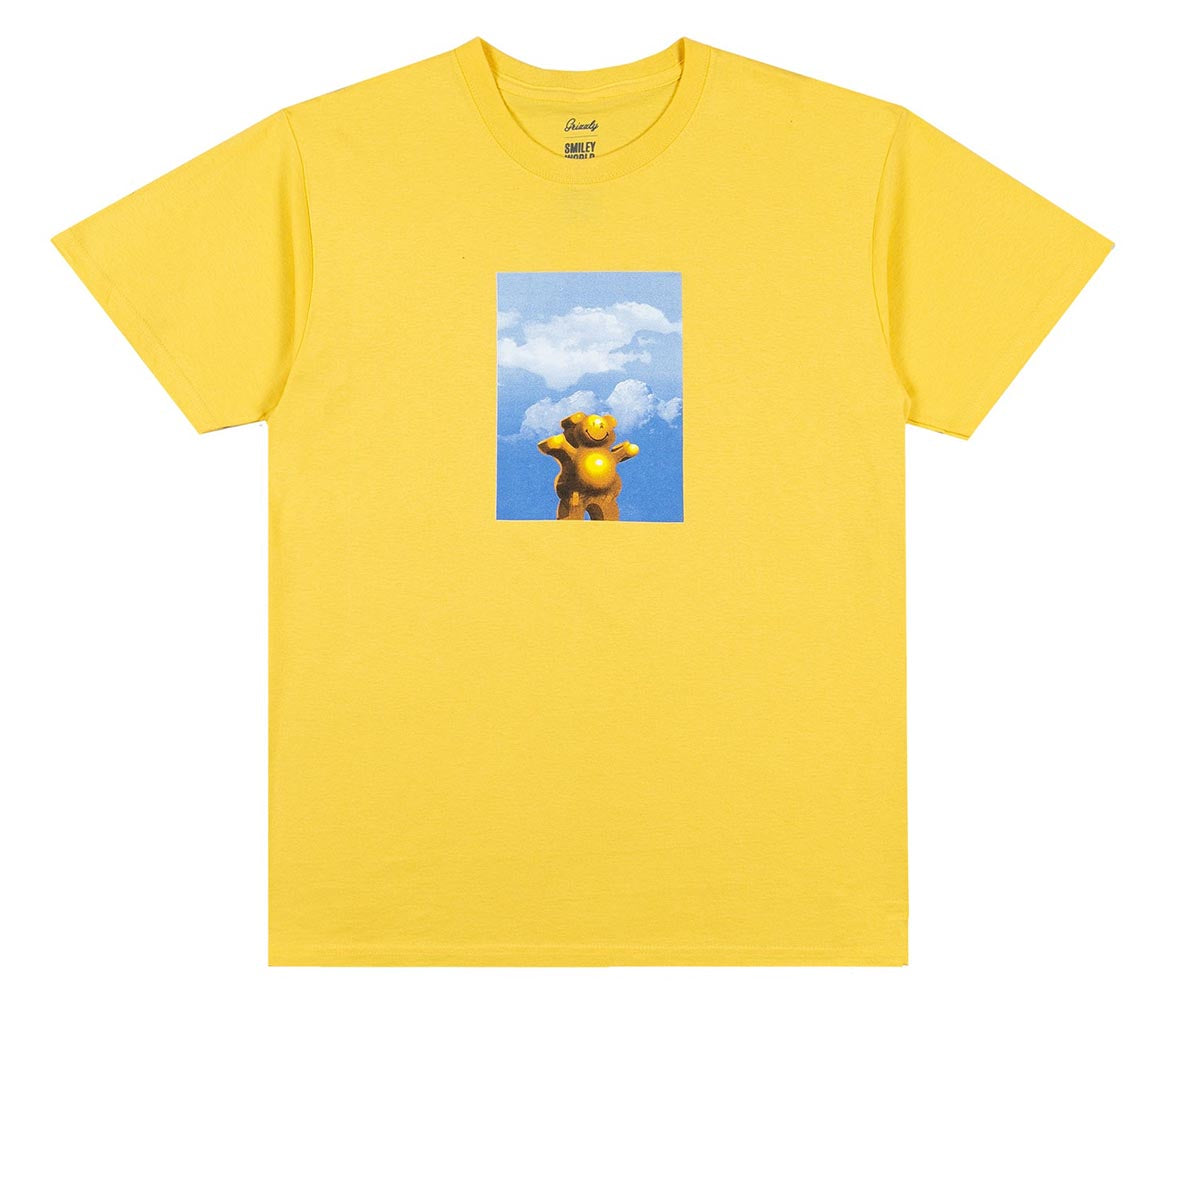 Grizzly x Smiley World Larger Than Life T-Shirt - Yellow image 1